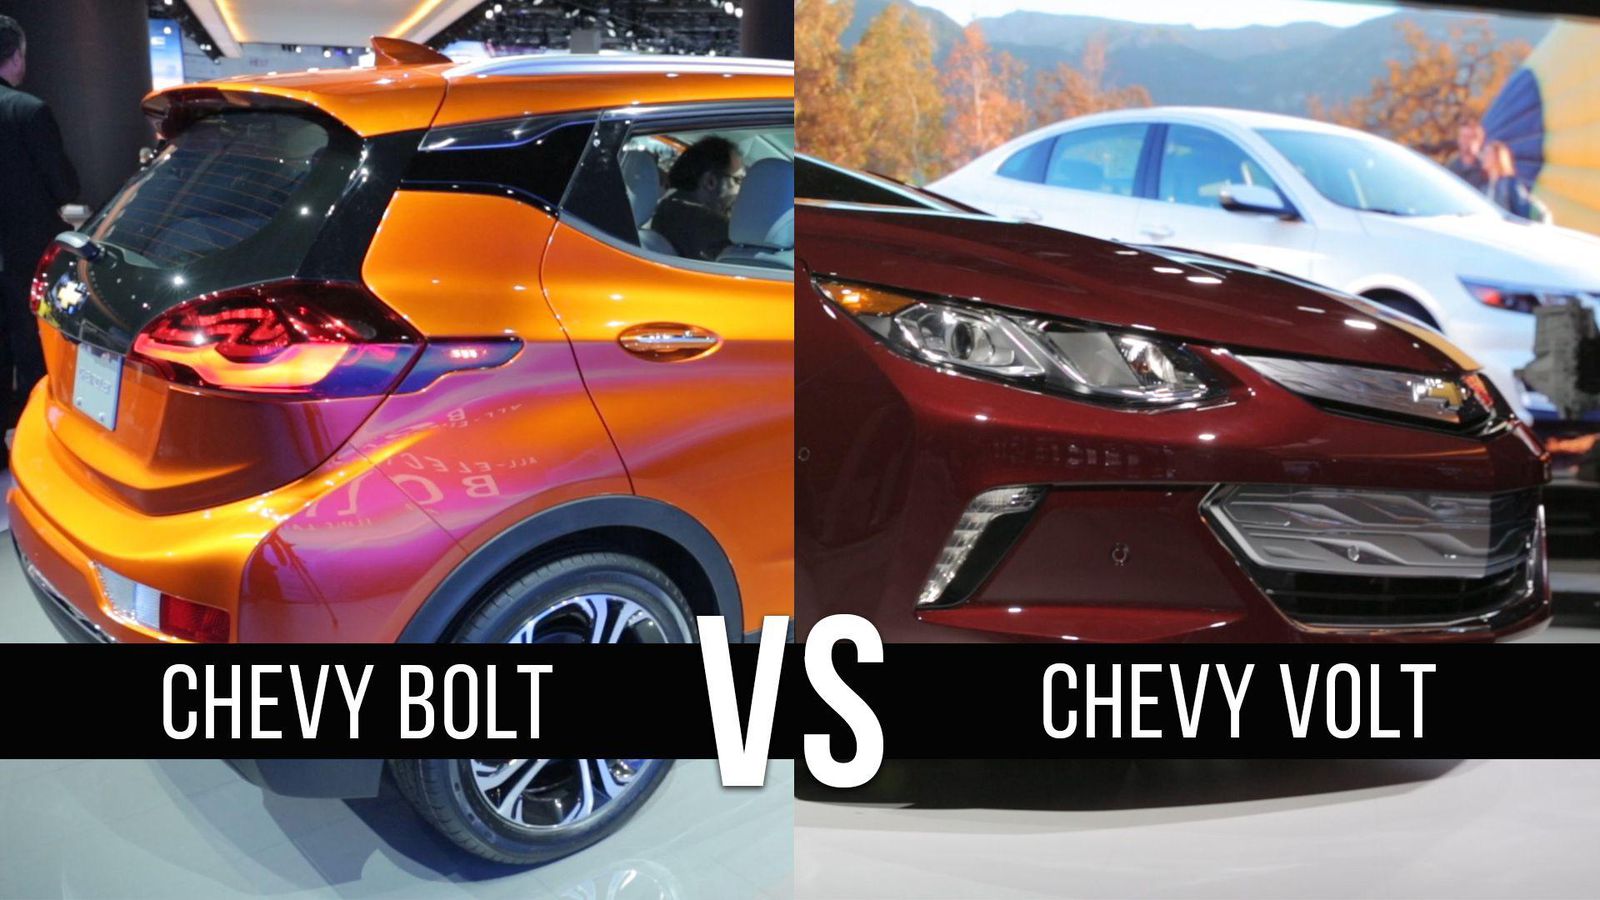 Chevy Bolt and Volt